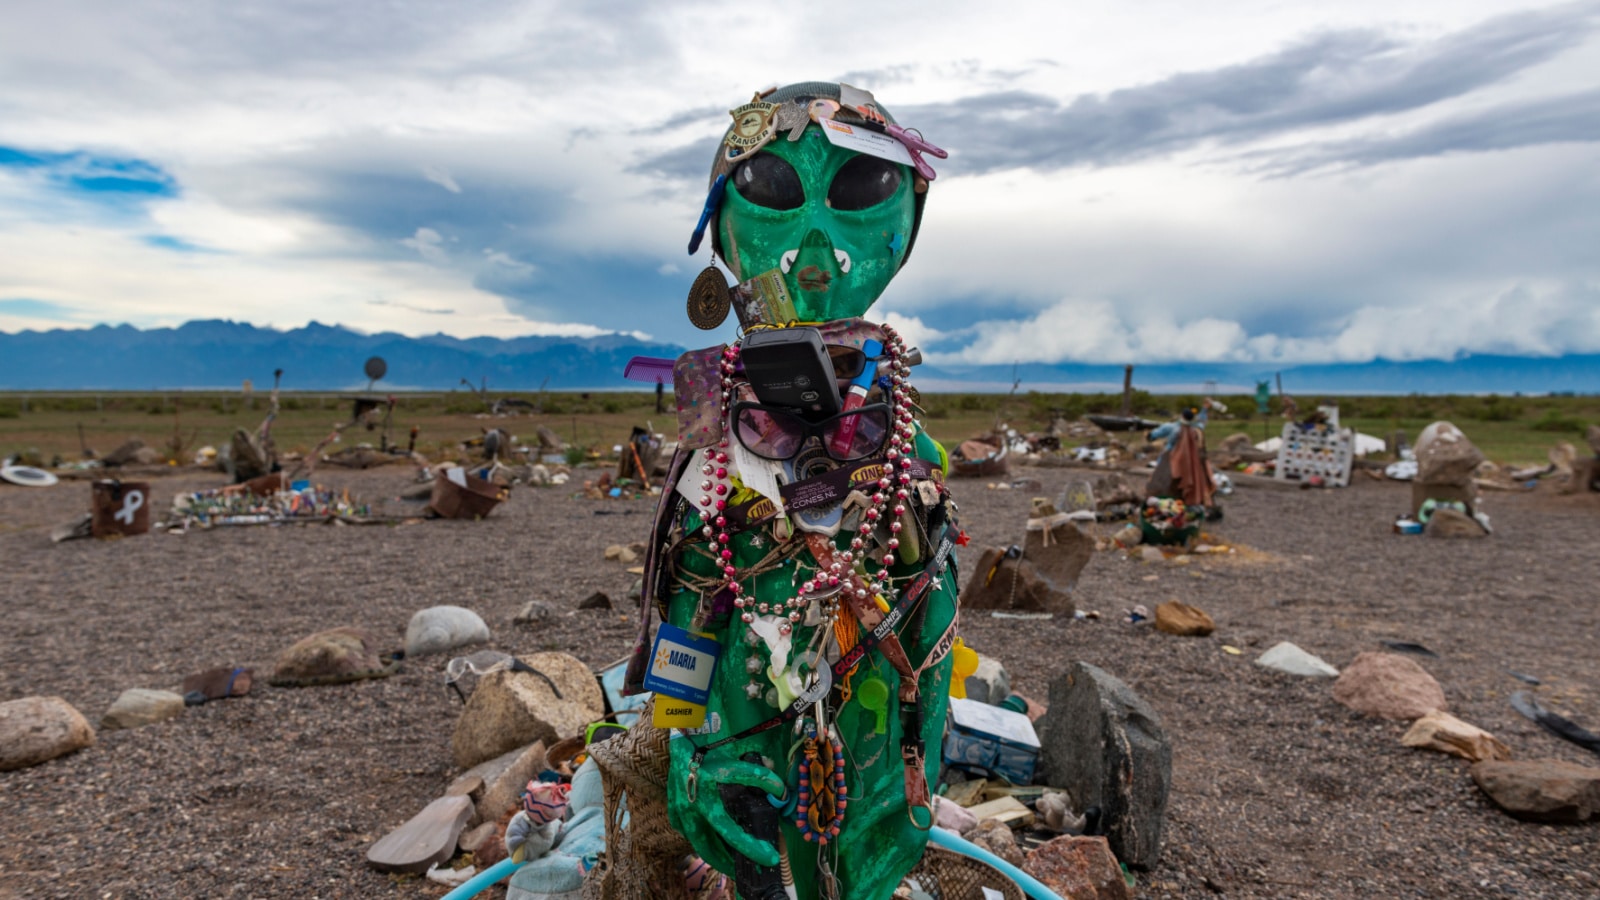 Hooper, Colorado - July 14, 2014: An alien statue at the UFO watchtower near town of Hooper, in the state of Colorado, USA.